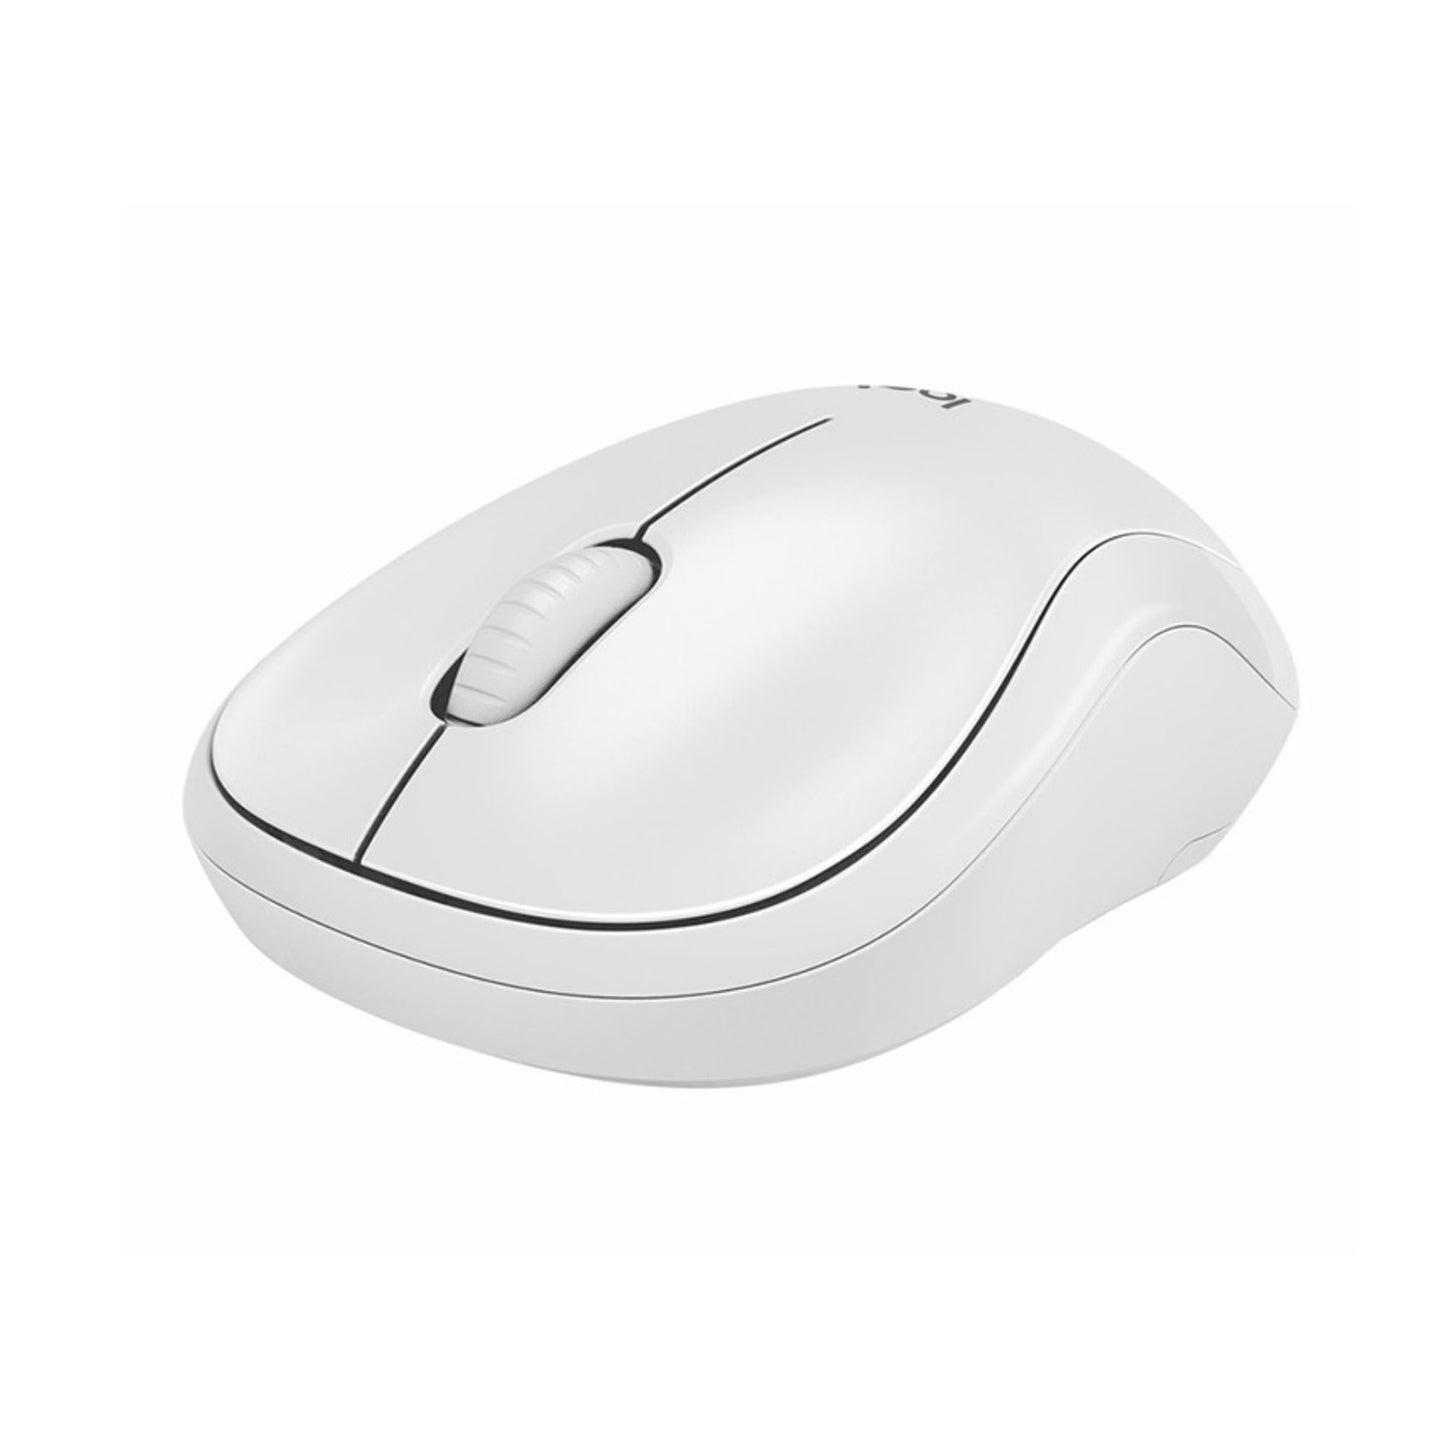 LOGITECH M221 Silent Wireless Mouse - Off White